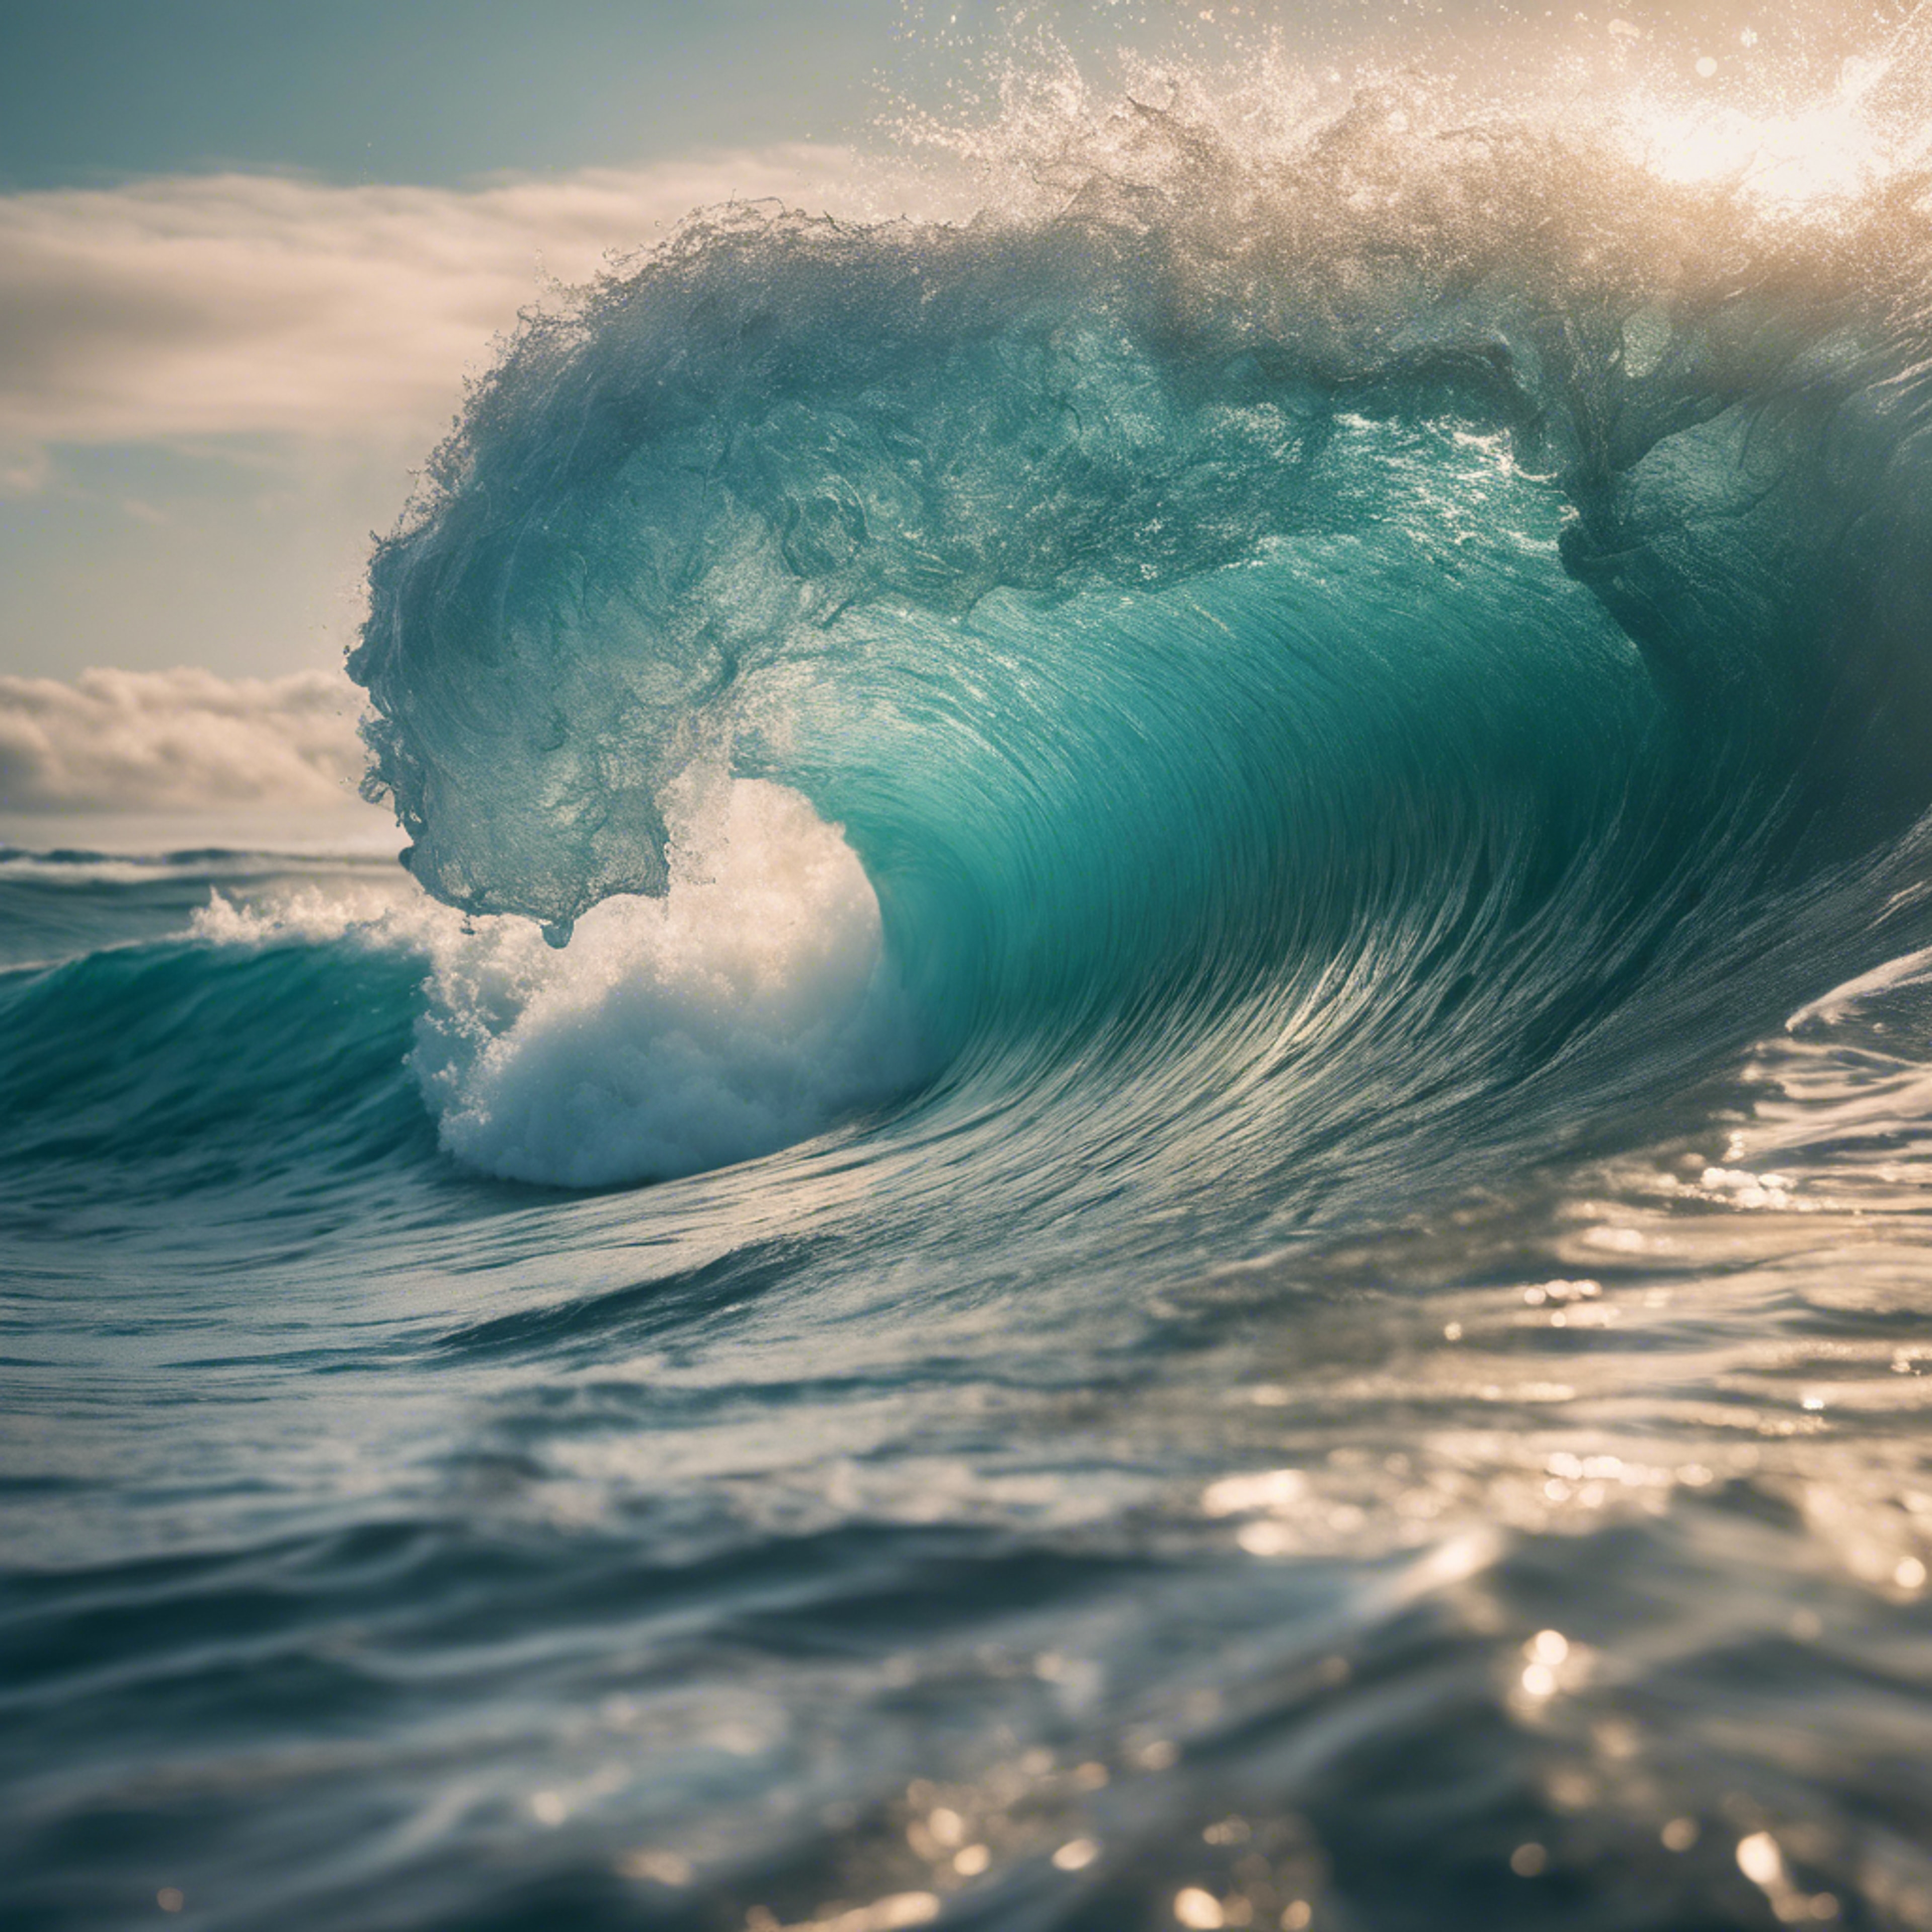 A powerful ocean wave about to crash, casting a cool teal hue. Tapéta[600fa377246440af9acb]